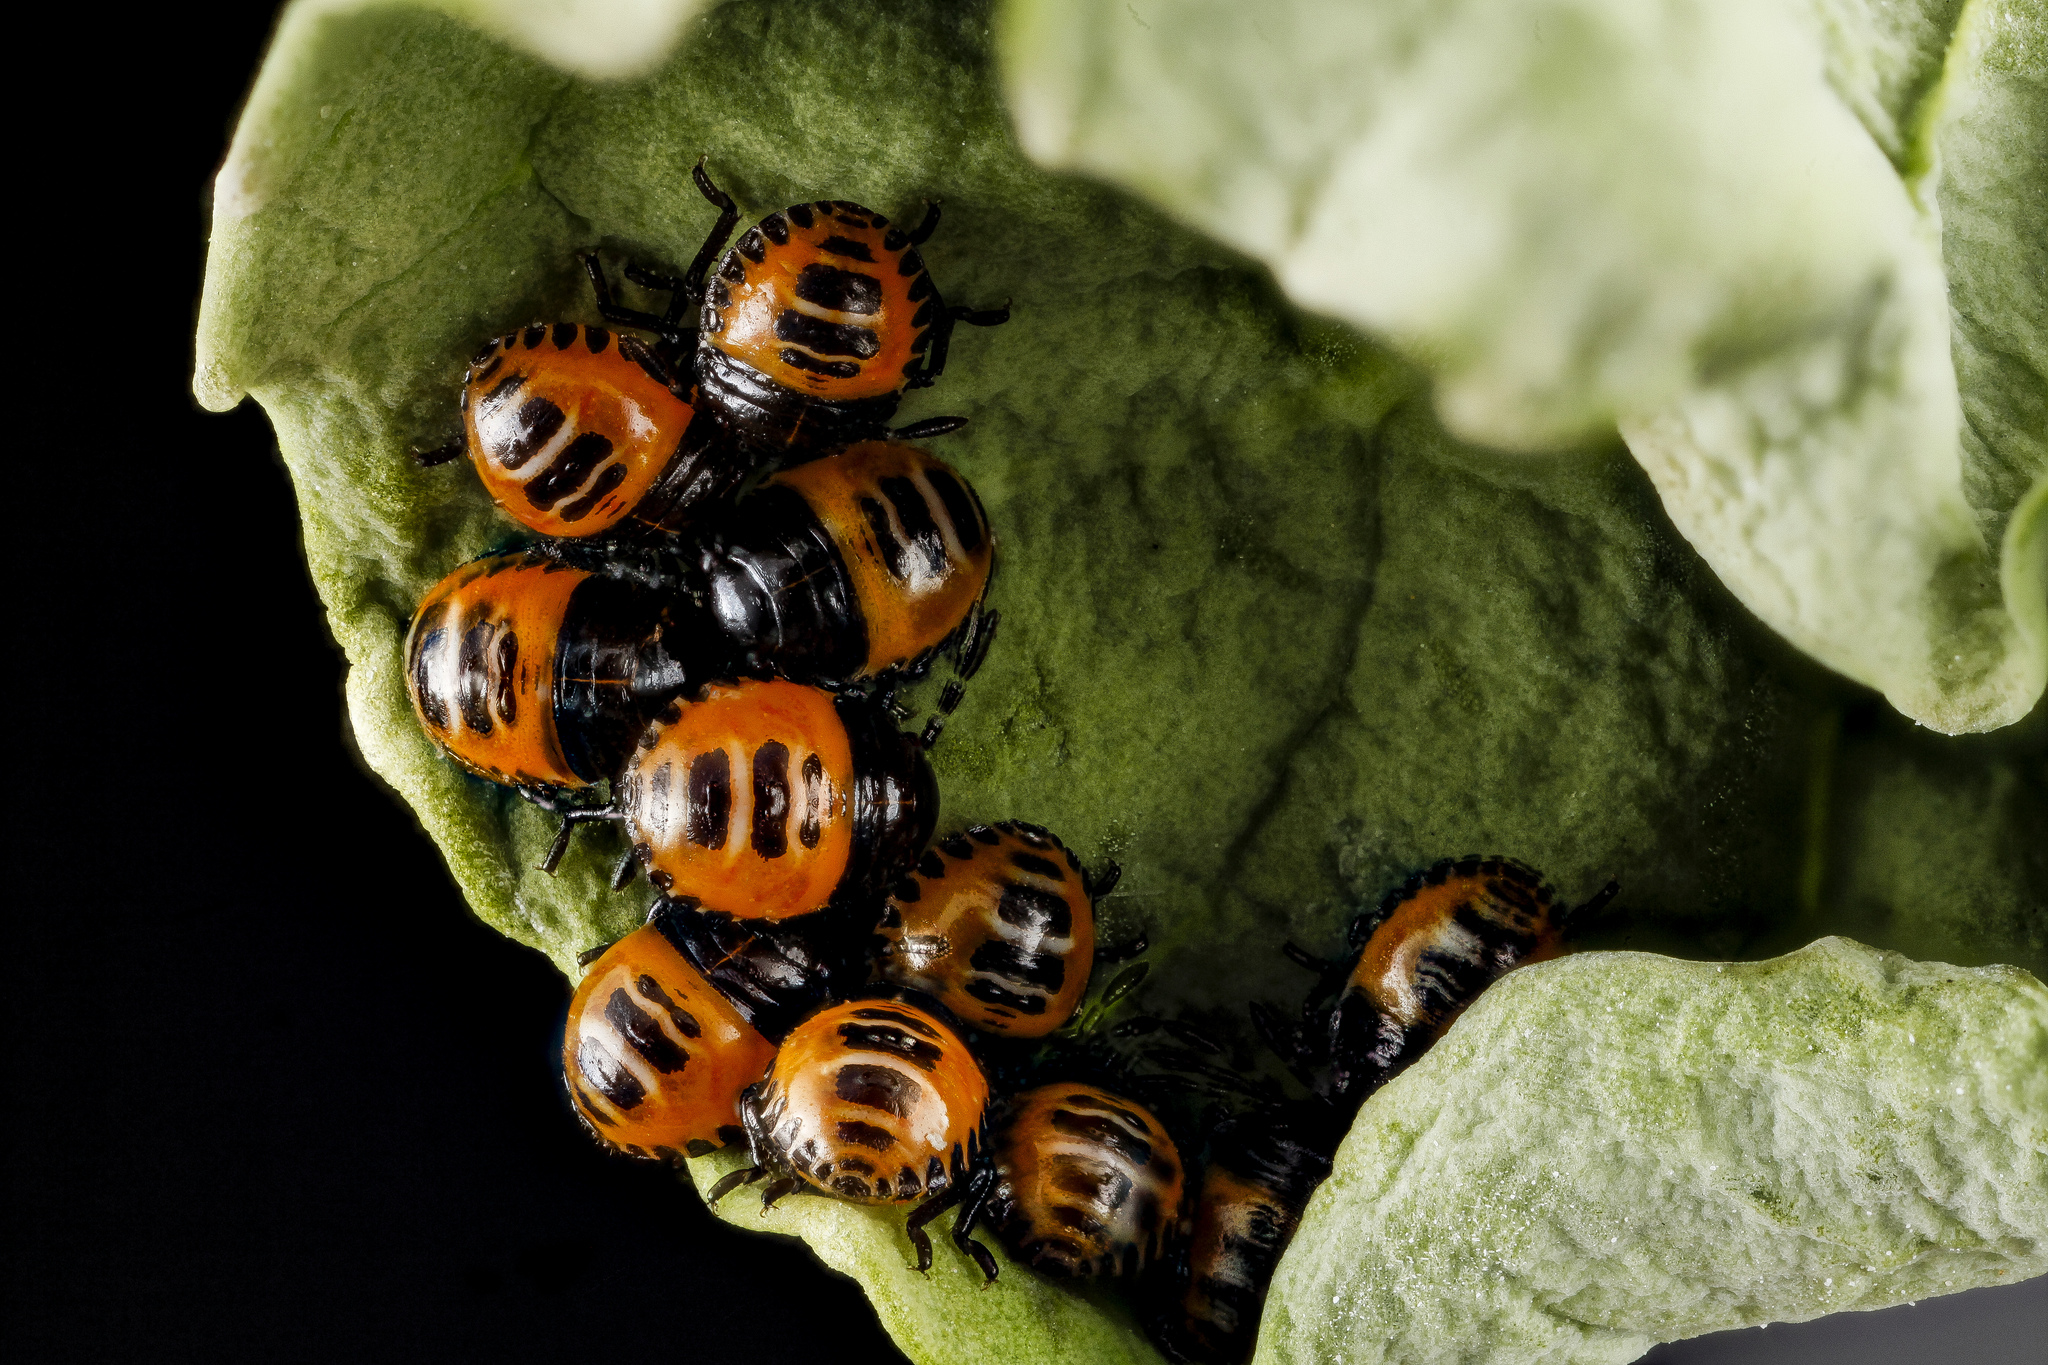 Harlequin bug nymphs. Credit: USGS Bee Inventory and Monitoring Lab/flickr/CC BY 2.0